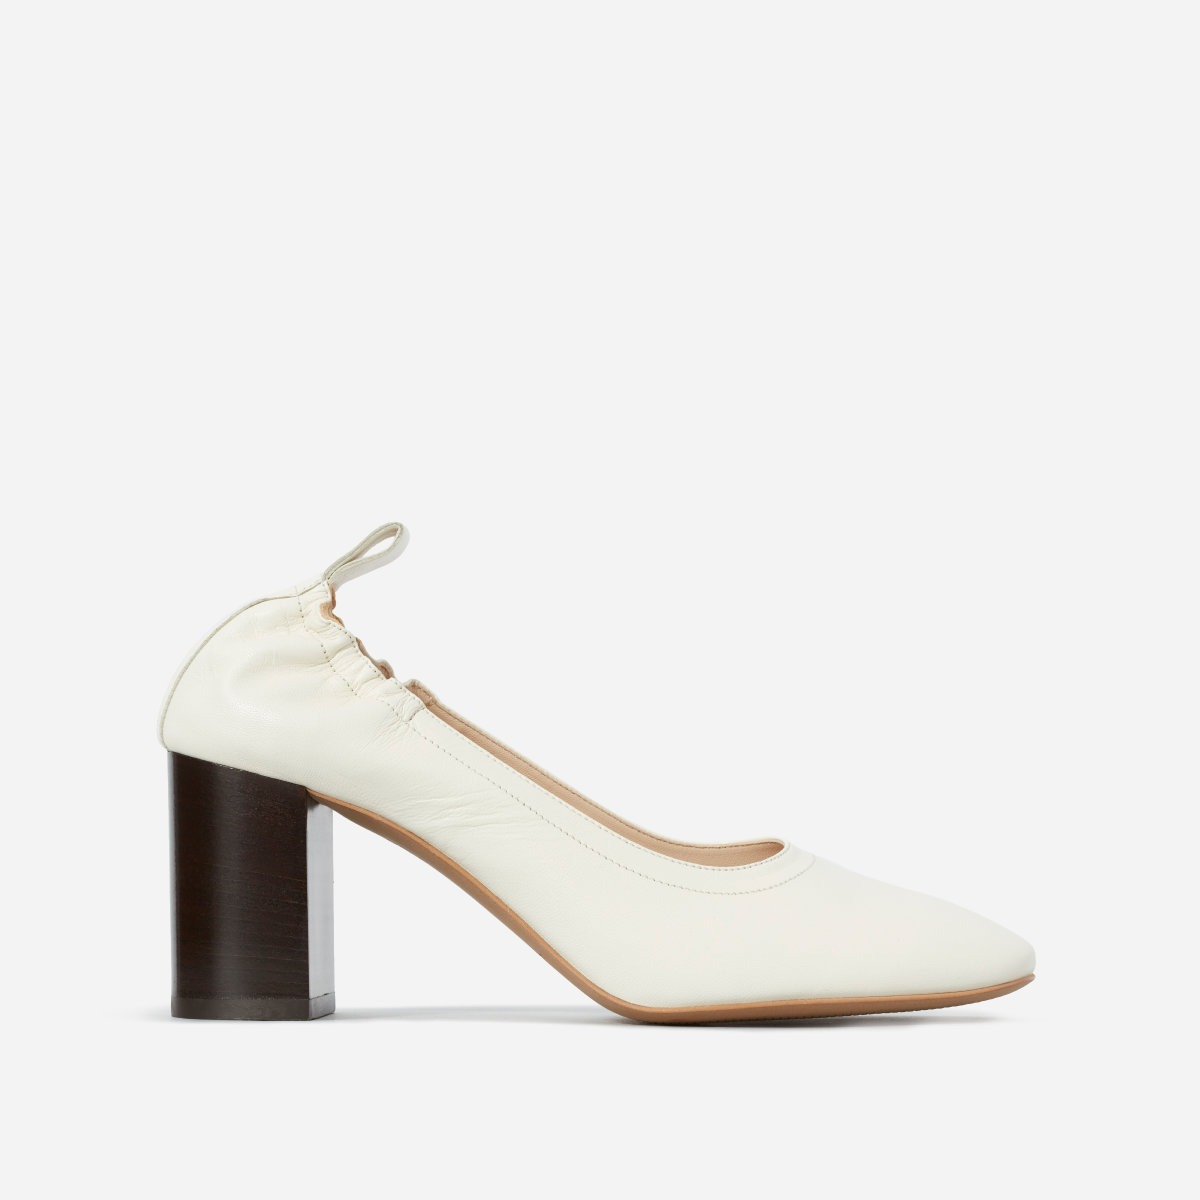 White - The Day High Heel by Everlane